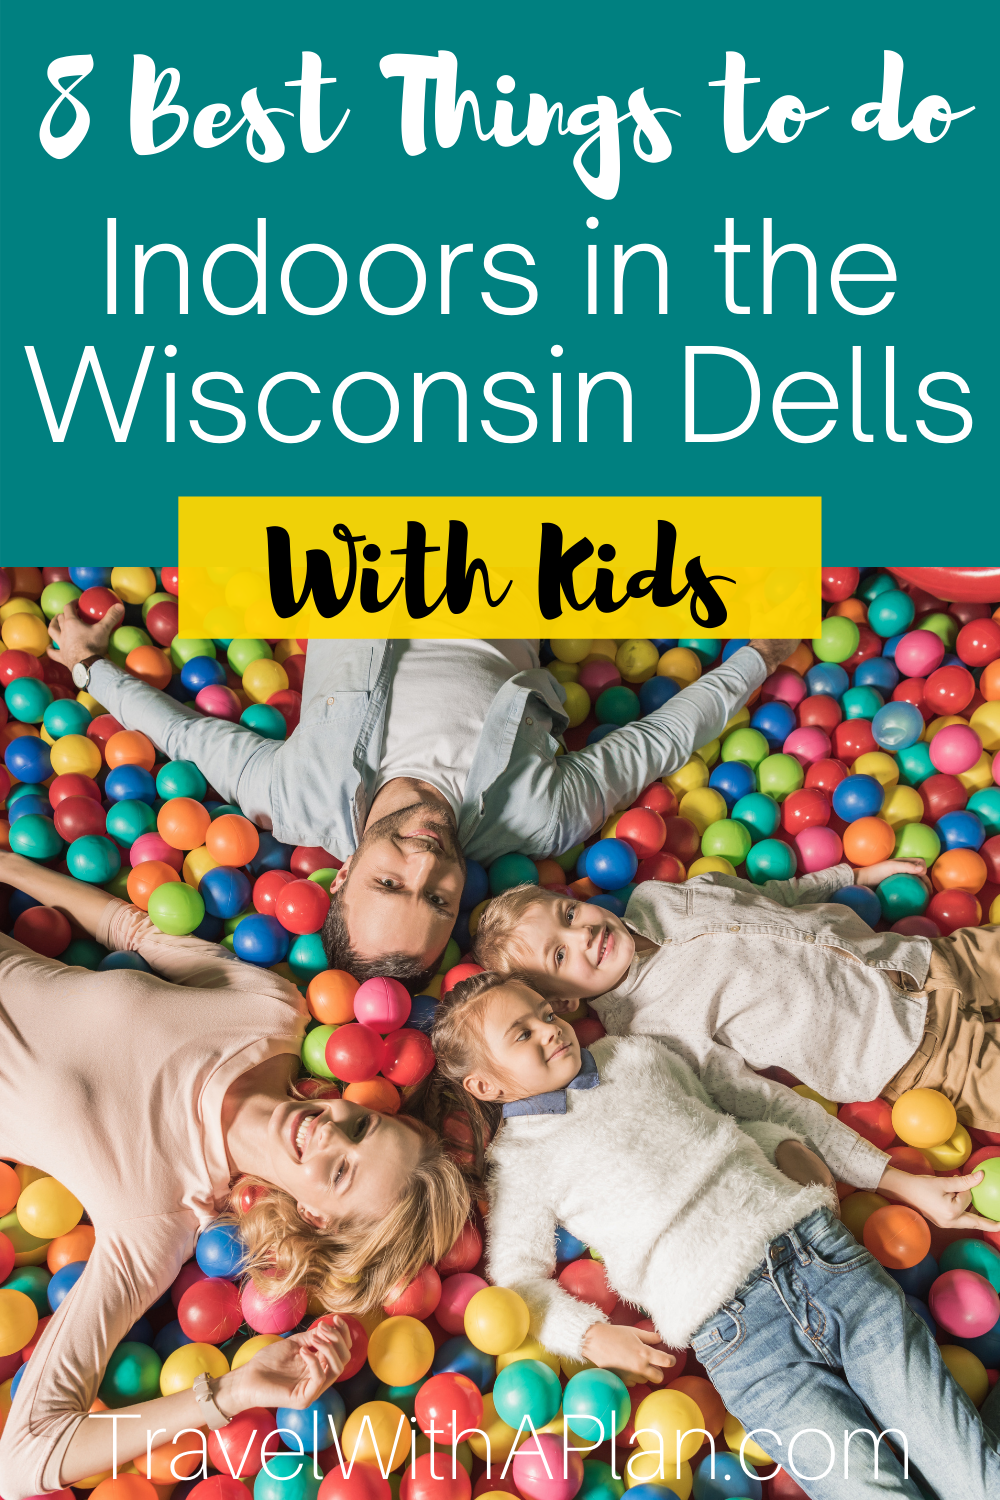 Here's our list of the best Wisconsin Dells indoor activities that are perfect for families with children, from Top U.S. family travel blog, Travel With A Plan.